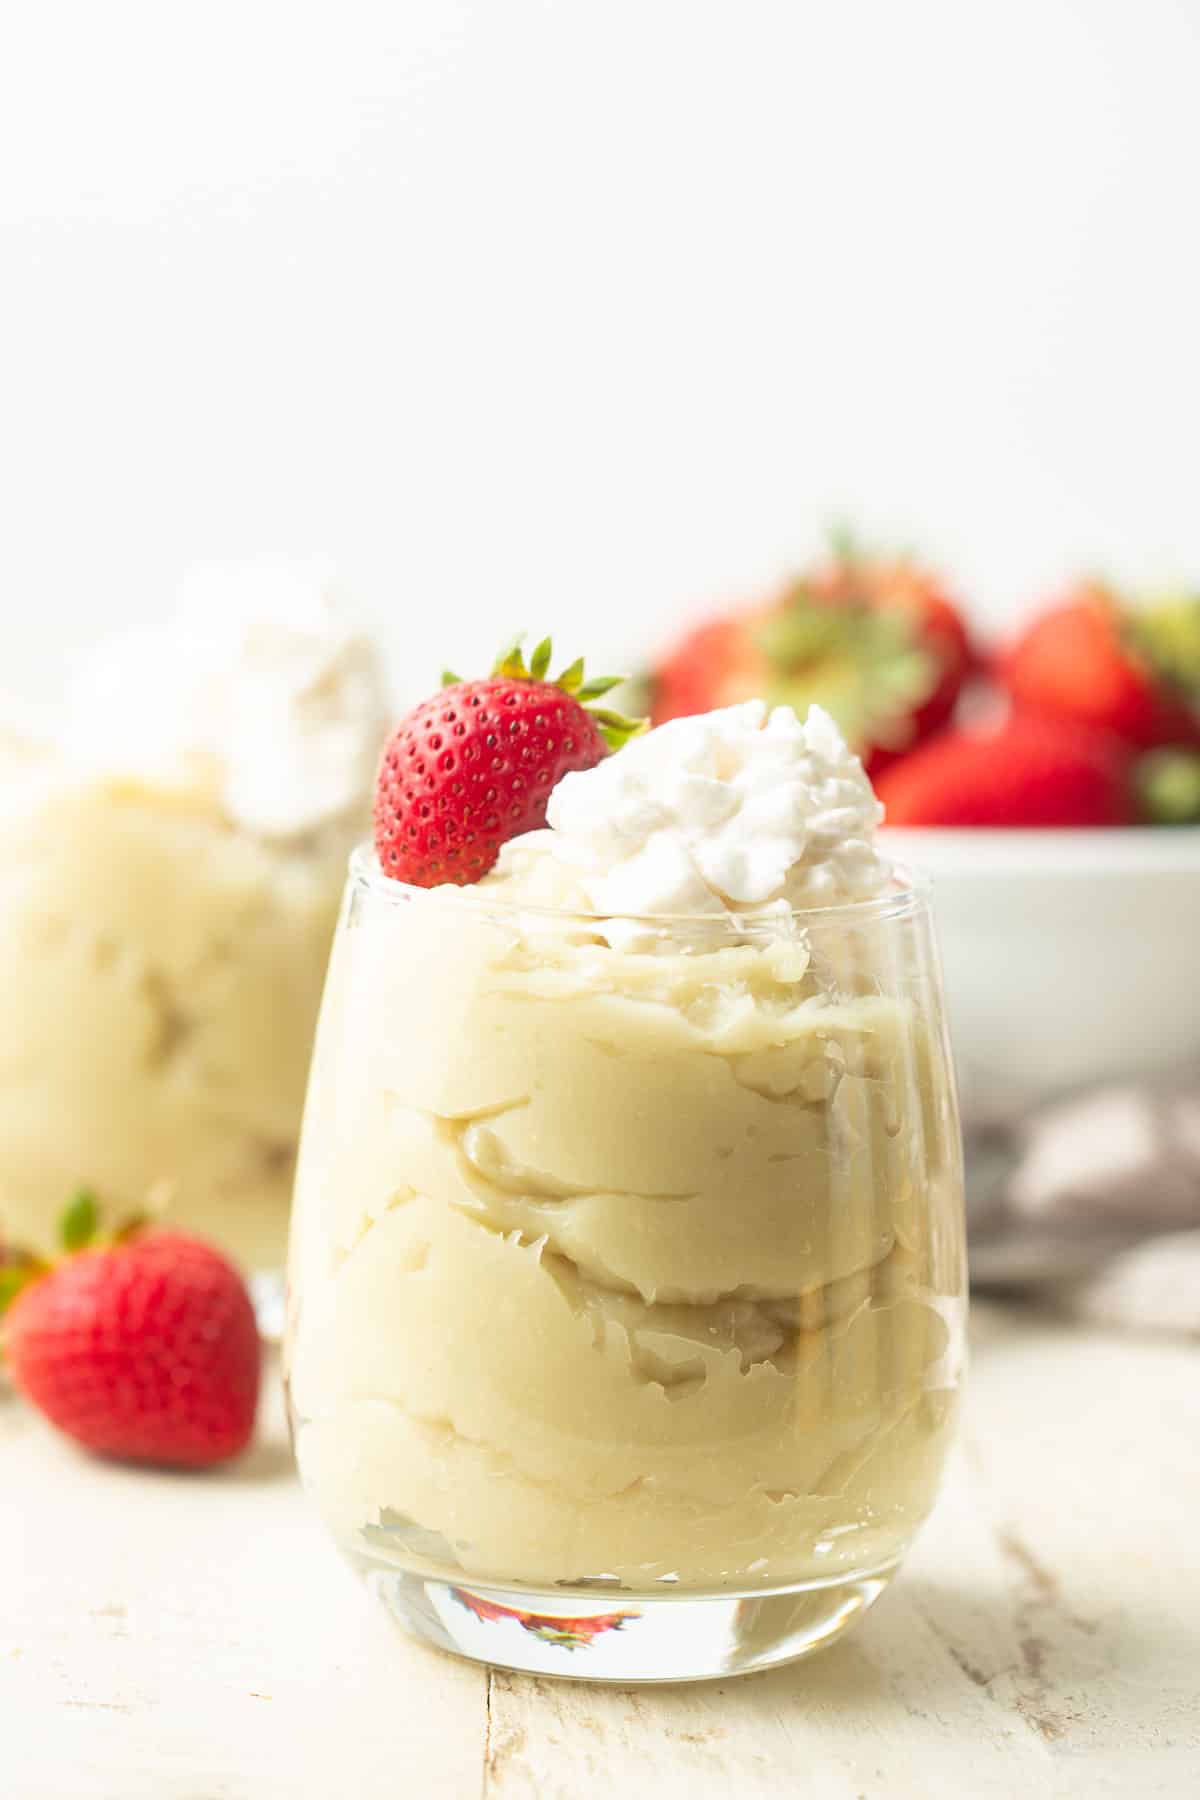 Jar of Vegan Custard with a bowl of strawberries in the background.